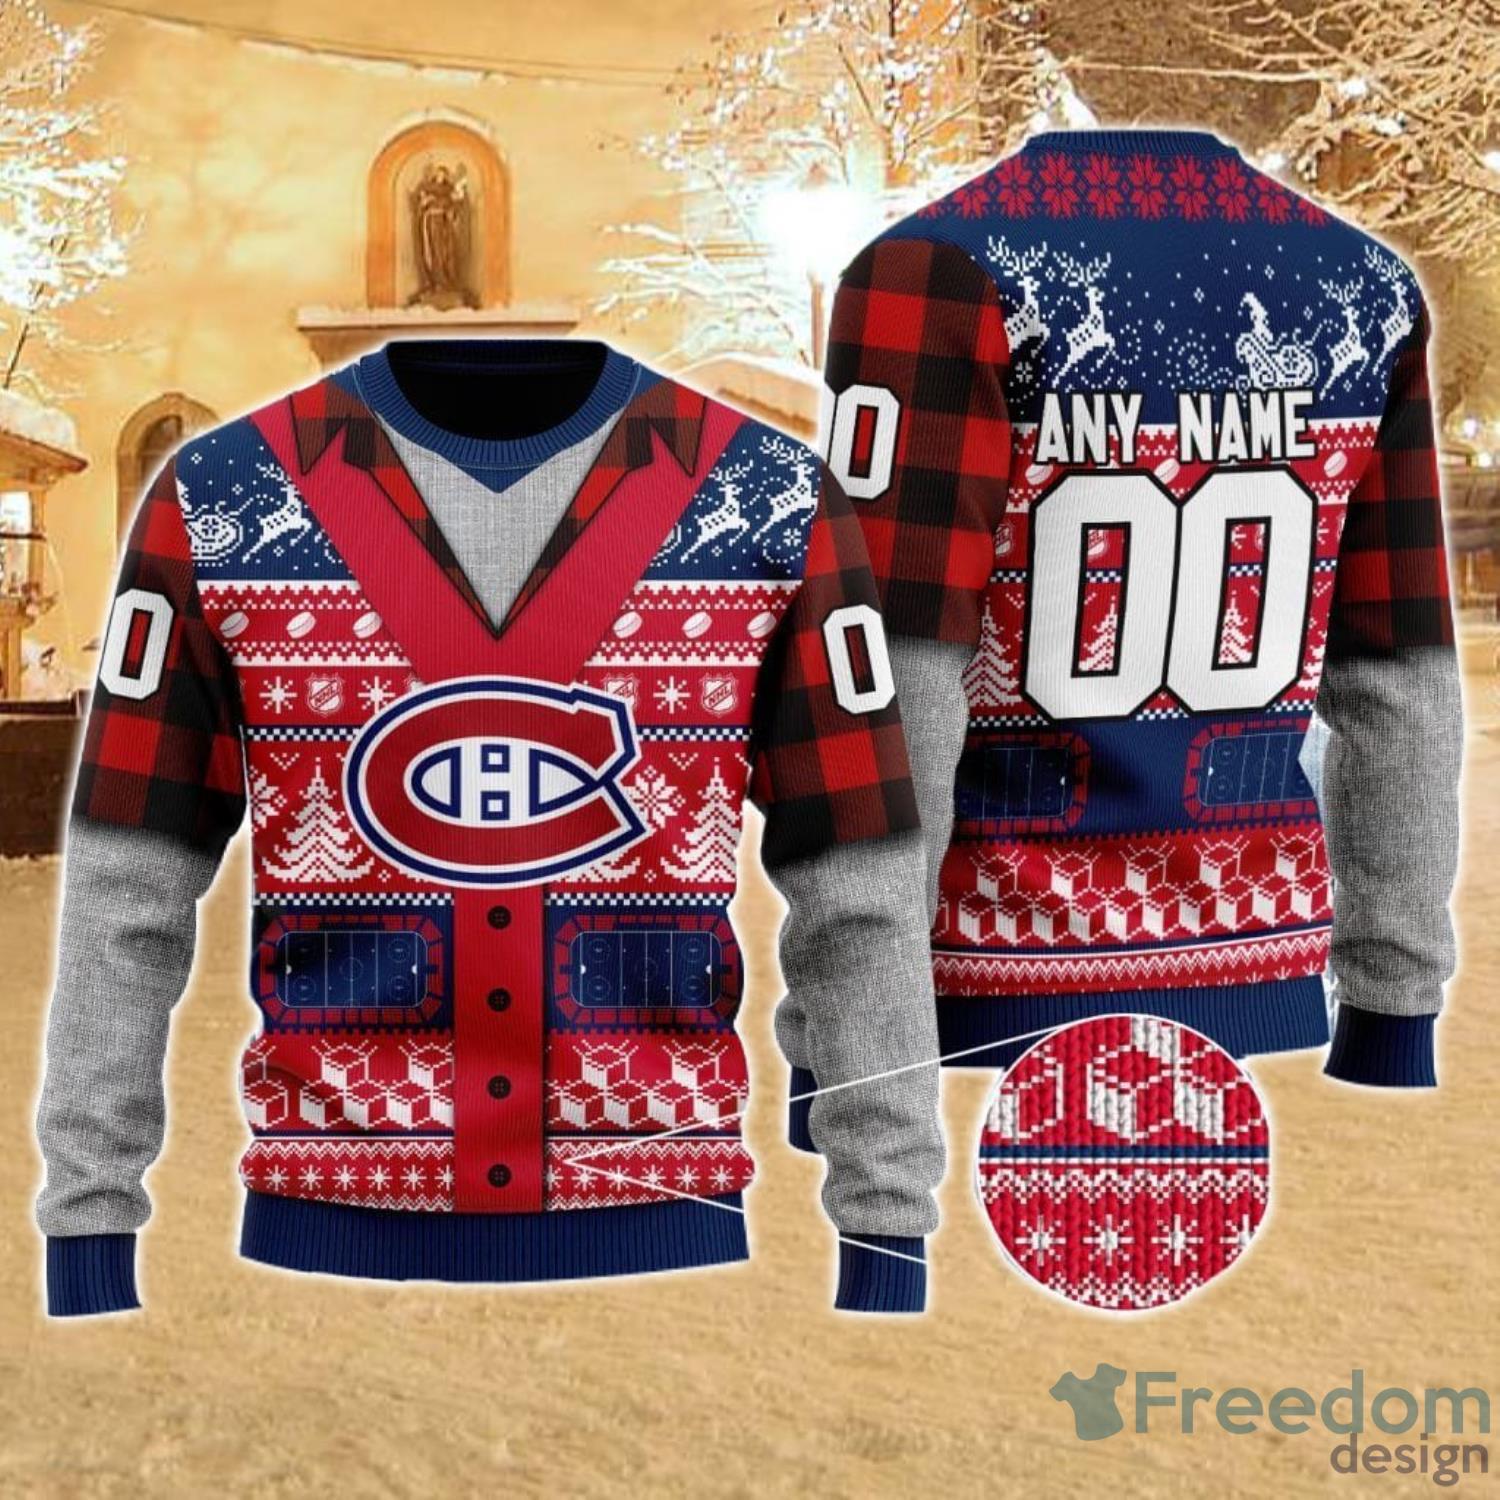 NHL Montreal Canadiens White Sweater Christmas Gift Ideas For Fans